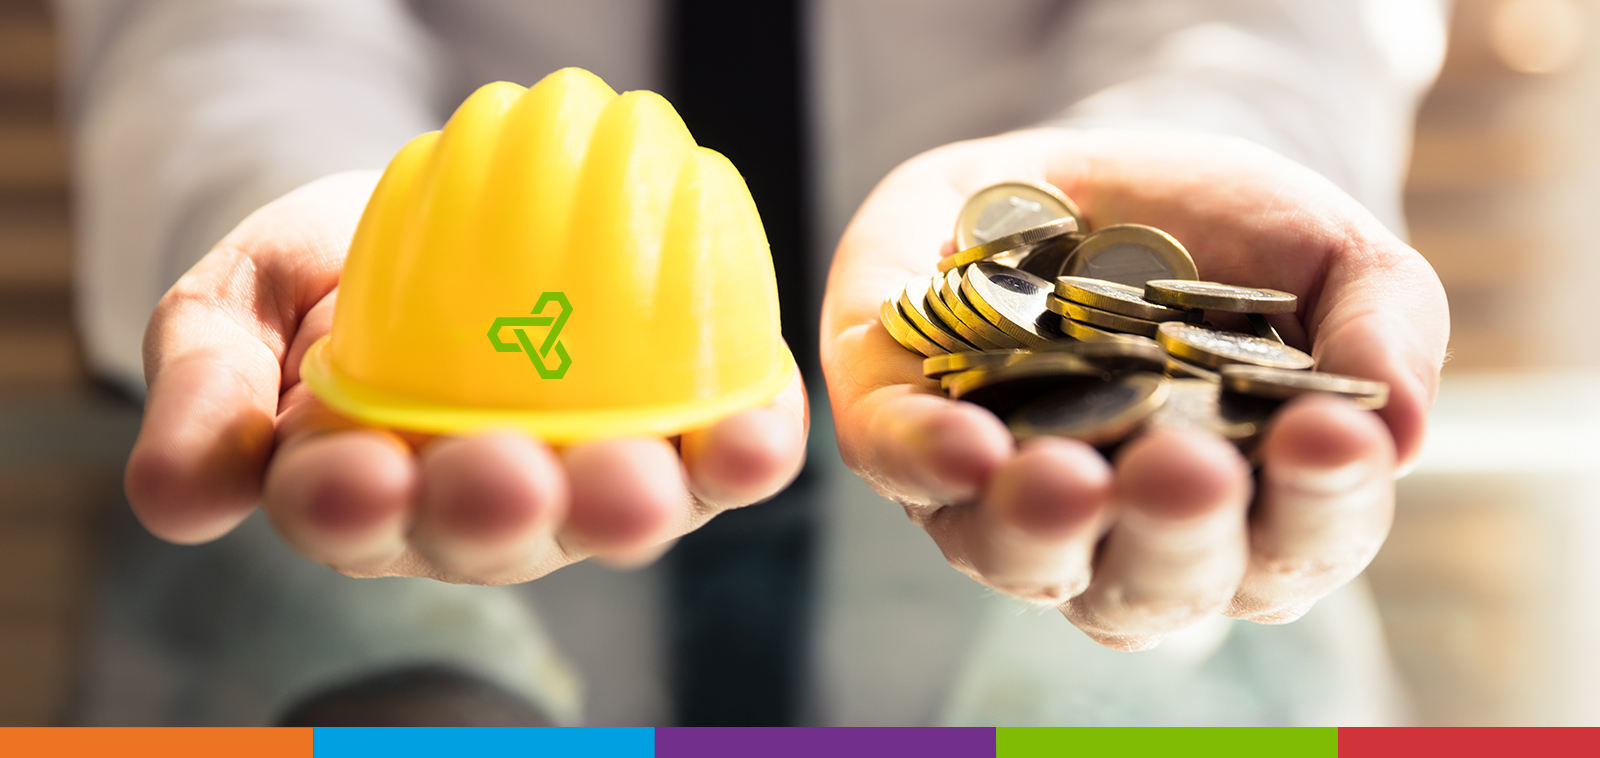 A person holding out their hands one holding a yellow hard hat and one holding coins